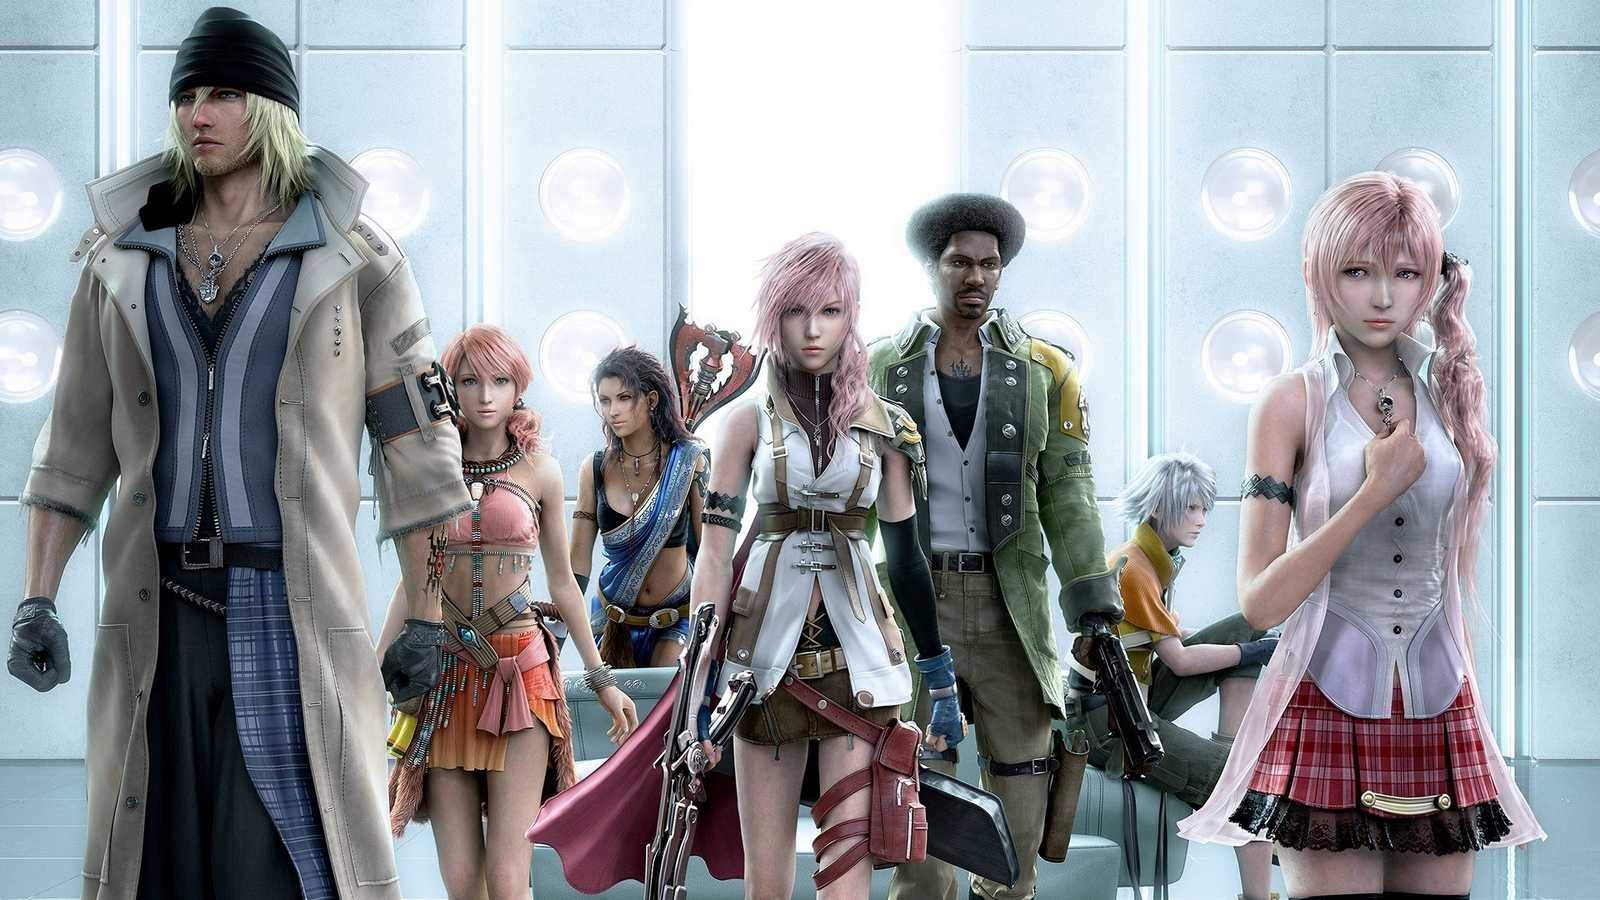 square-enix-is-now-streaming-final-fantasy-xiii-to-ios-and-android-devices-in-japan